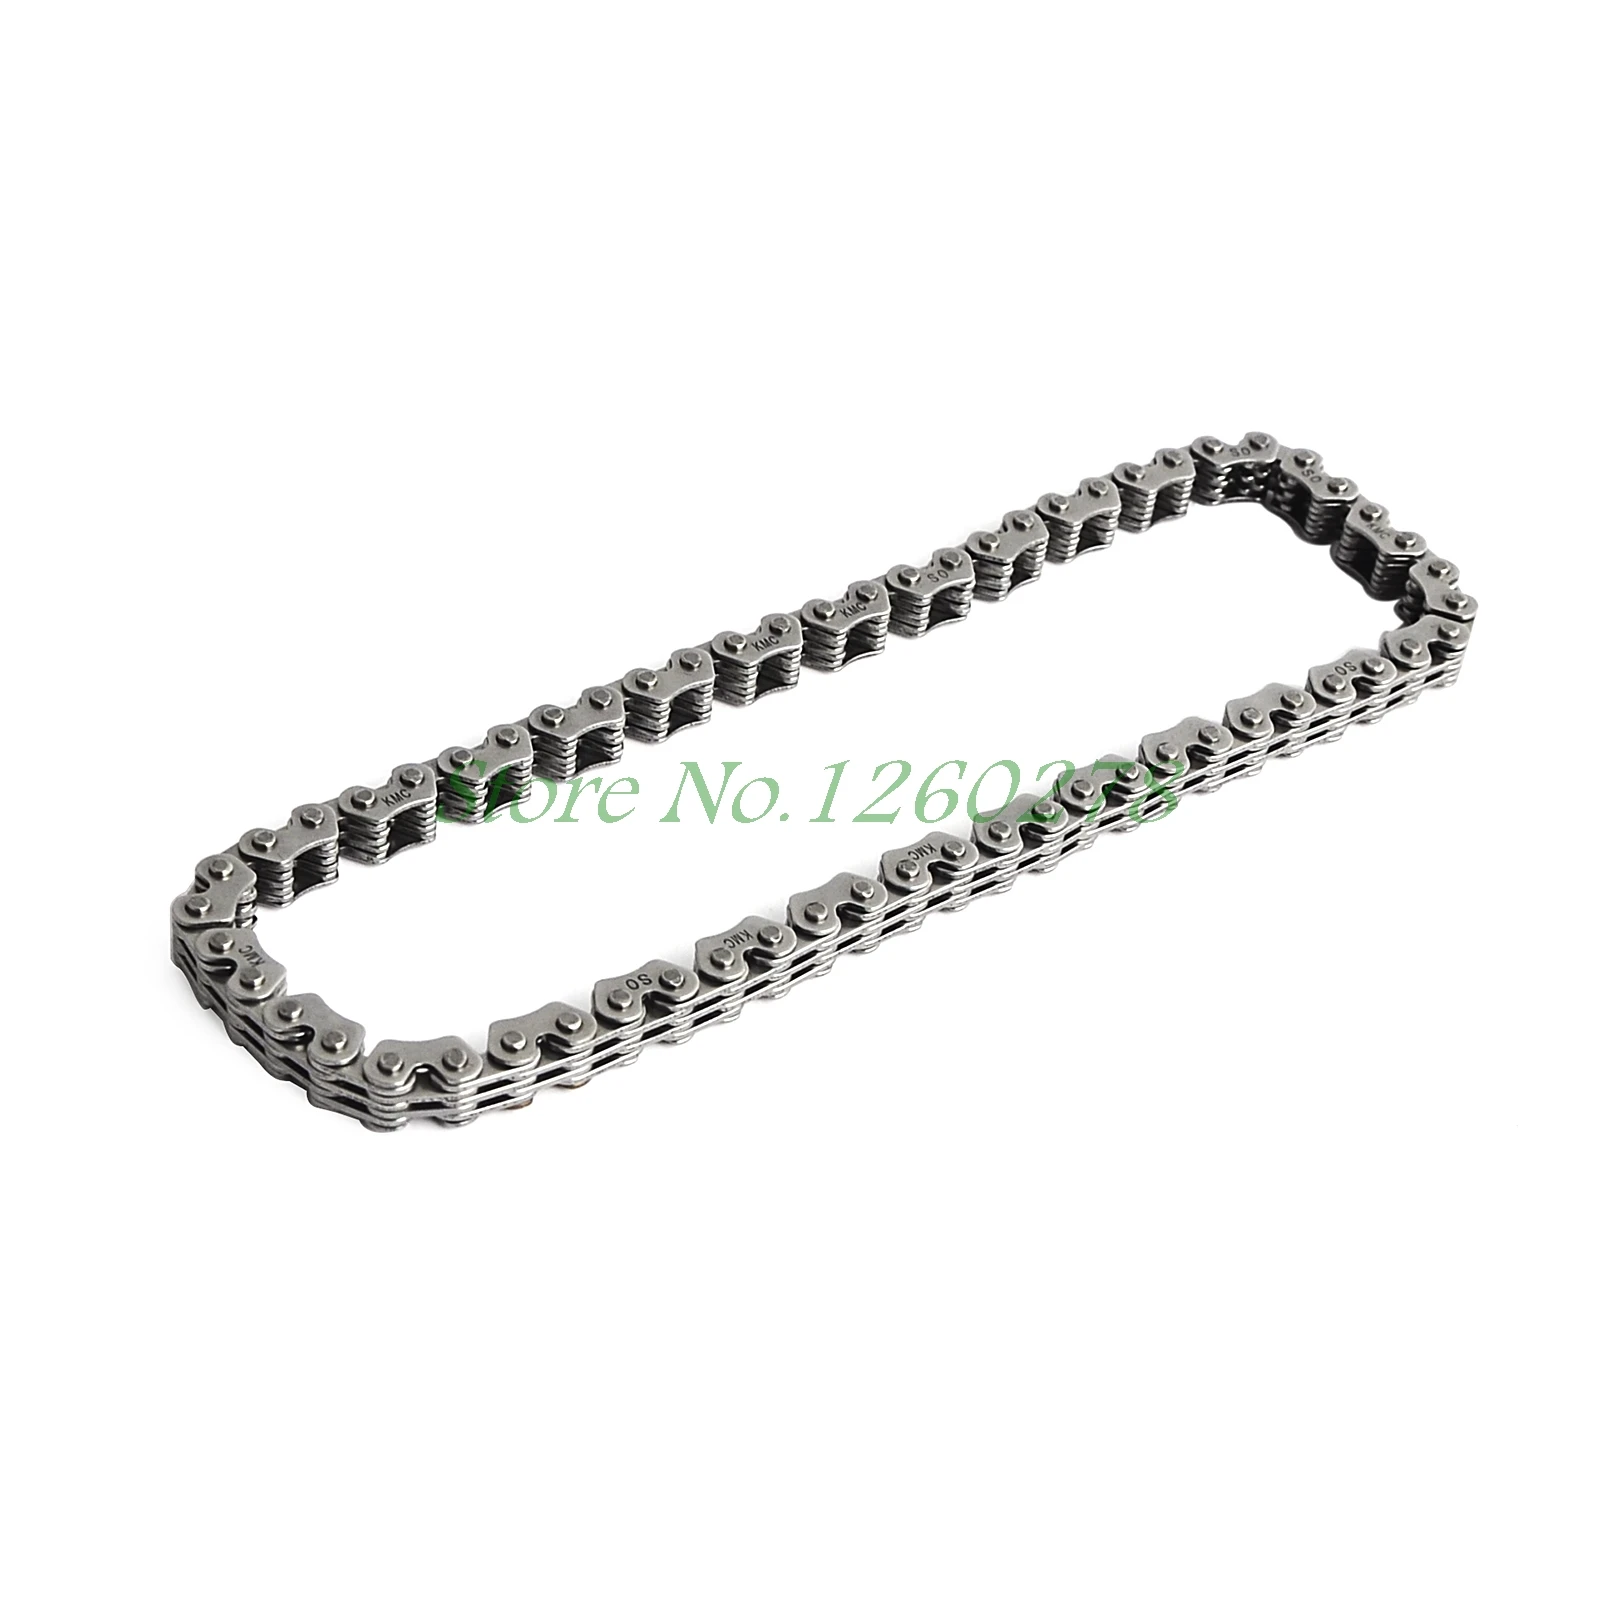 New KMC Cam Chain Timing Chain for Honda Rancher 420 & Foreman 500 & Pioneer 500 